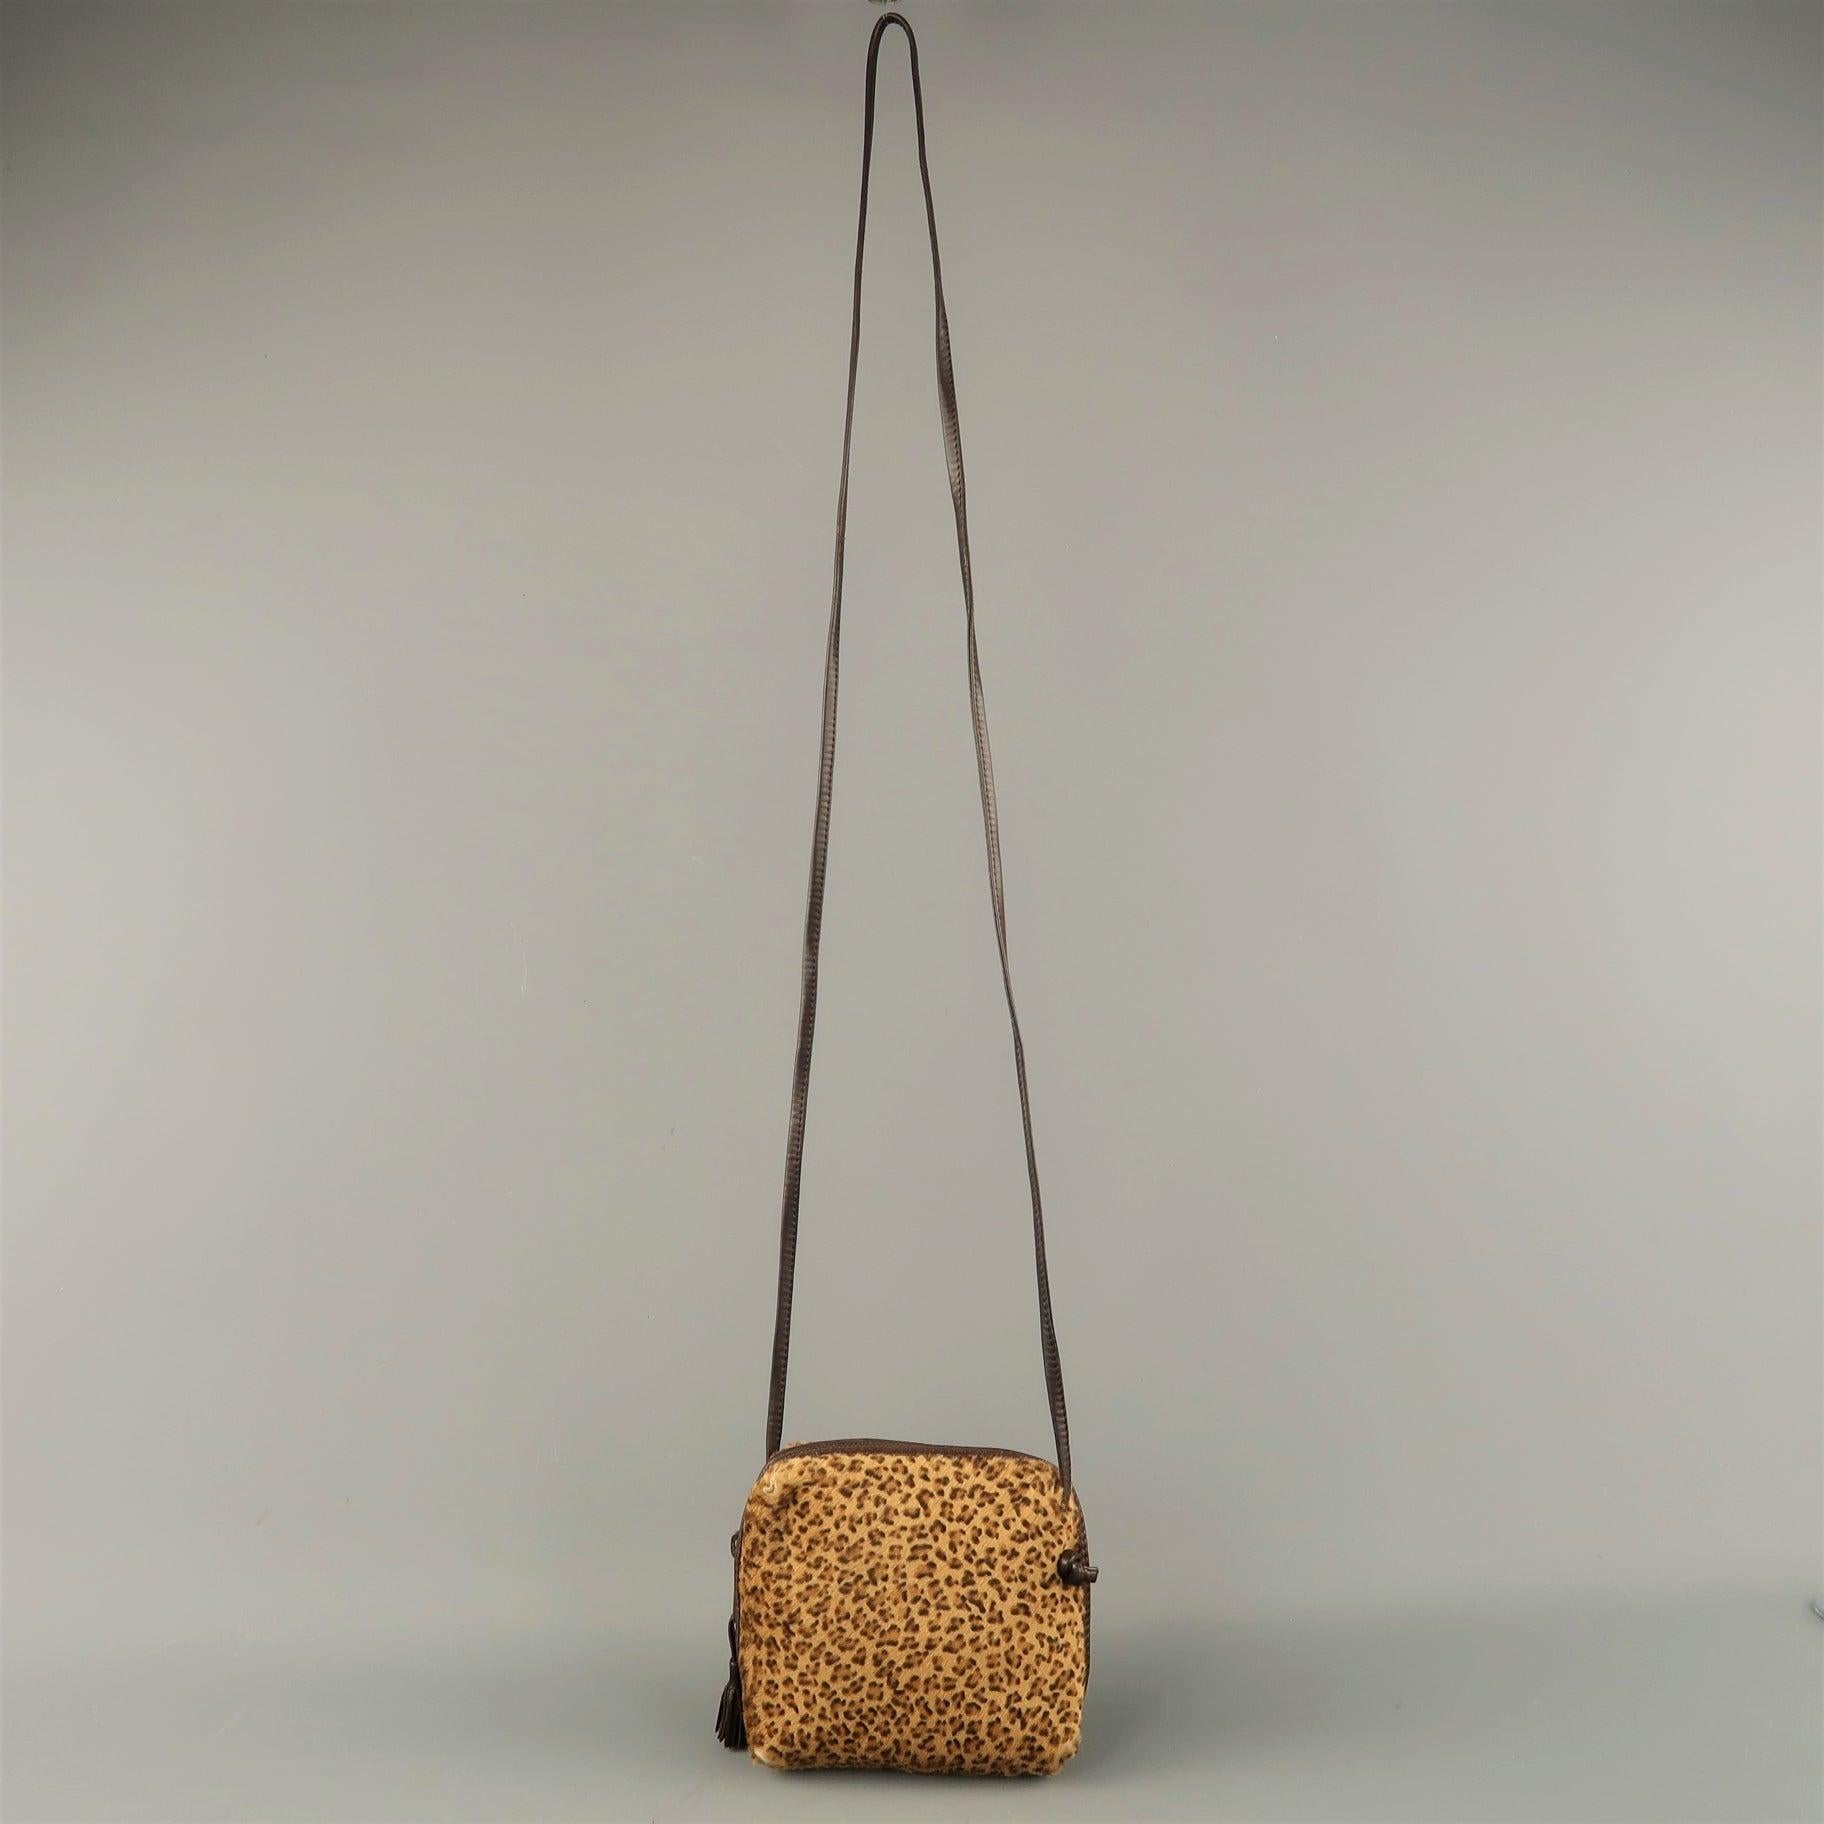 Vintage BOTTEGA VENETA mini crossbody bag comes in leopard print ponyhair in a square shape with top tassel zip and skinny strap. Wear throughout. As-is. Made in Italy.Fair Pre-Owned Condition. 

Measurements: 
  Length: 5 inches Width: 2 inches